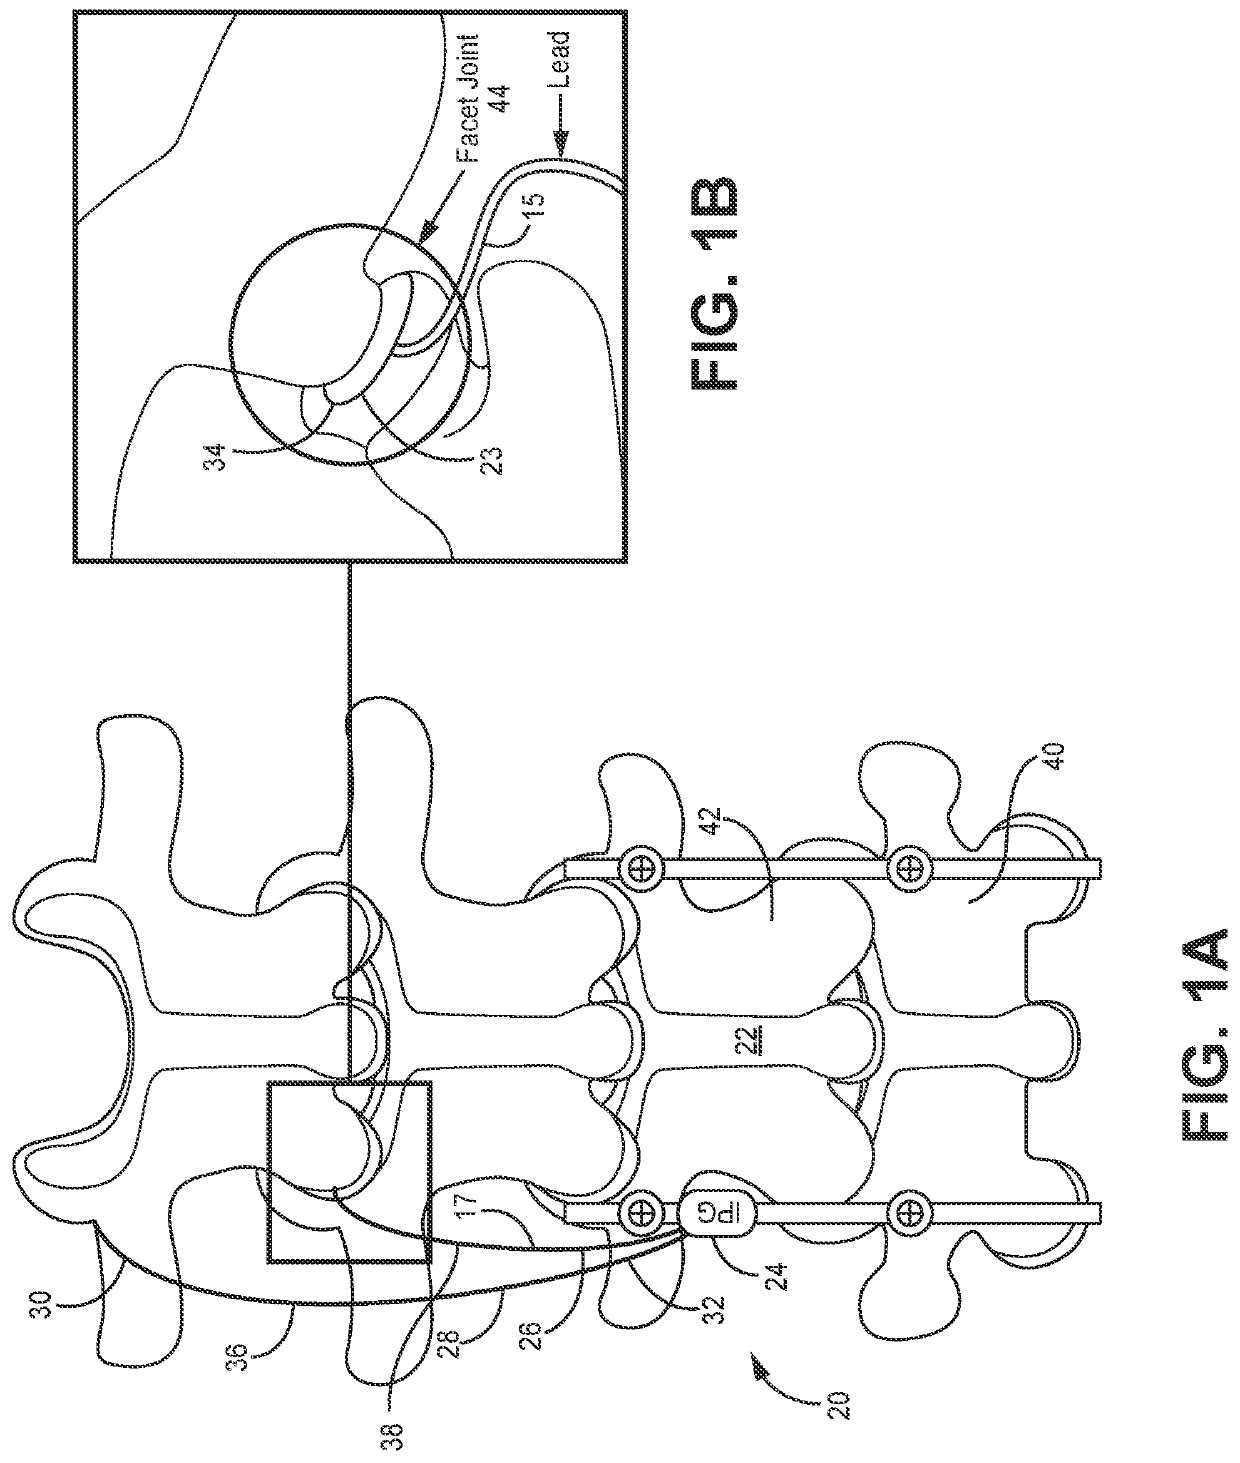 Systems, devices and methods for placement and fixation of neuromodulation system in combination with a minimall invasive spinal procedure